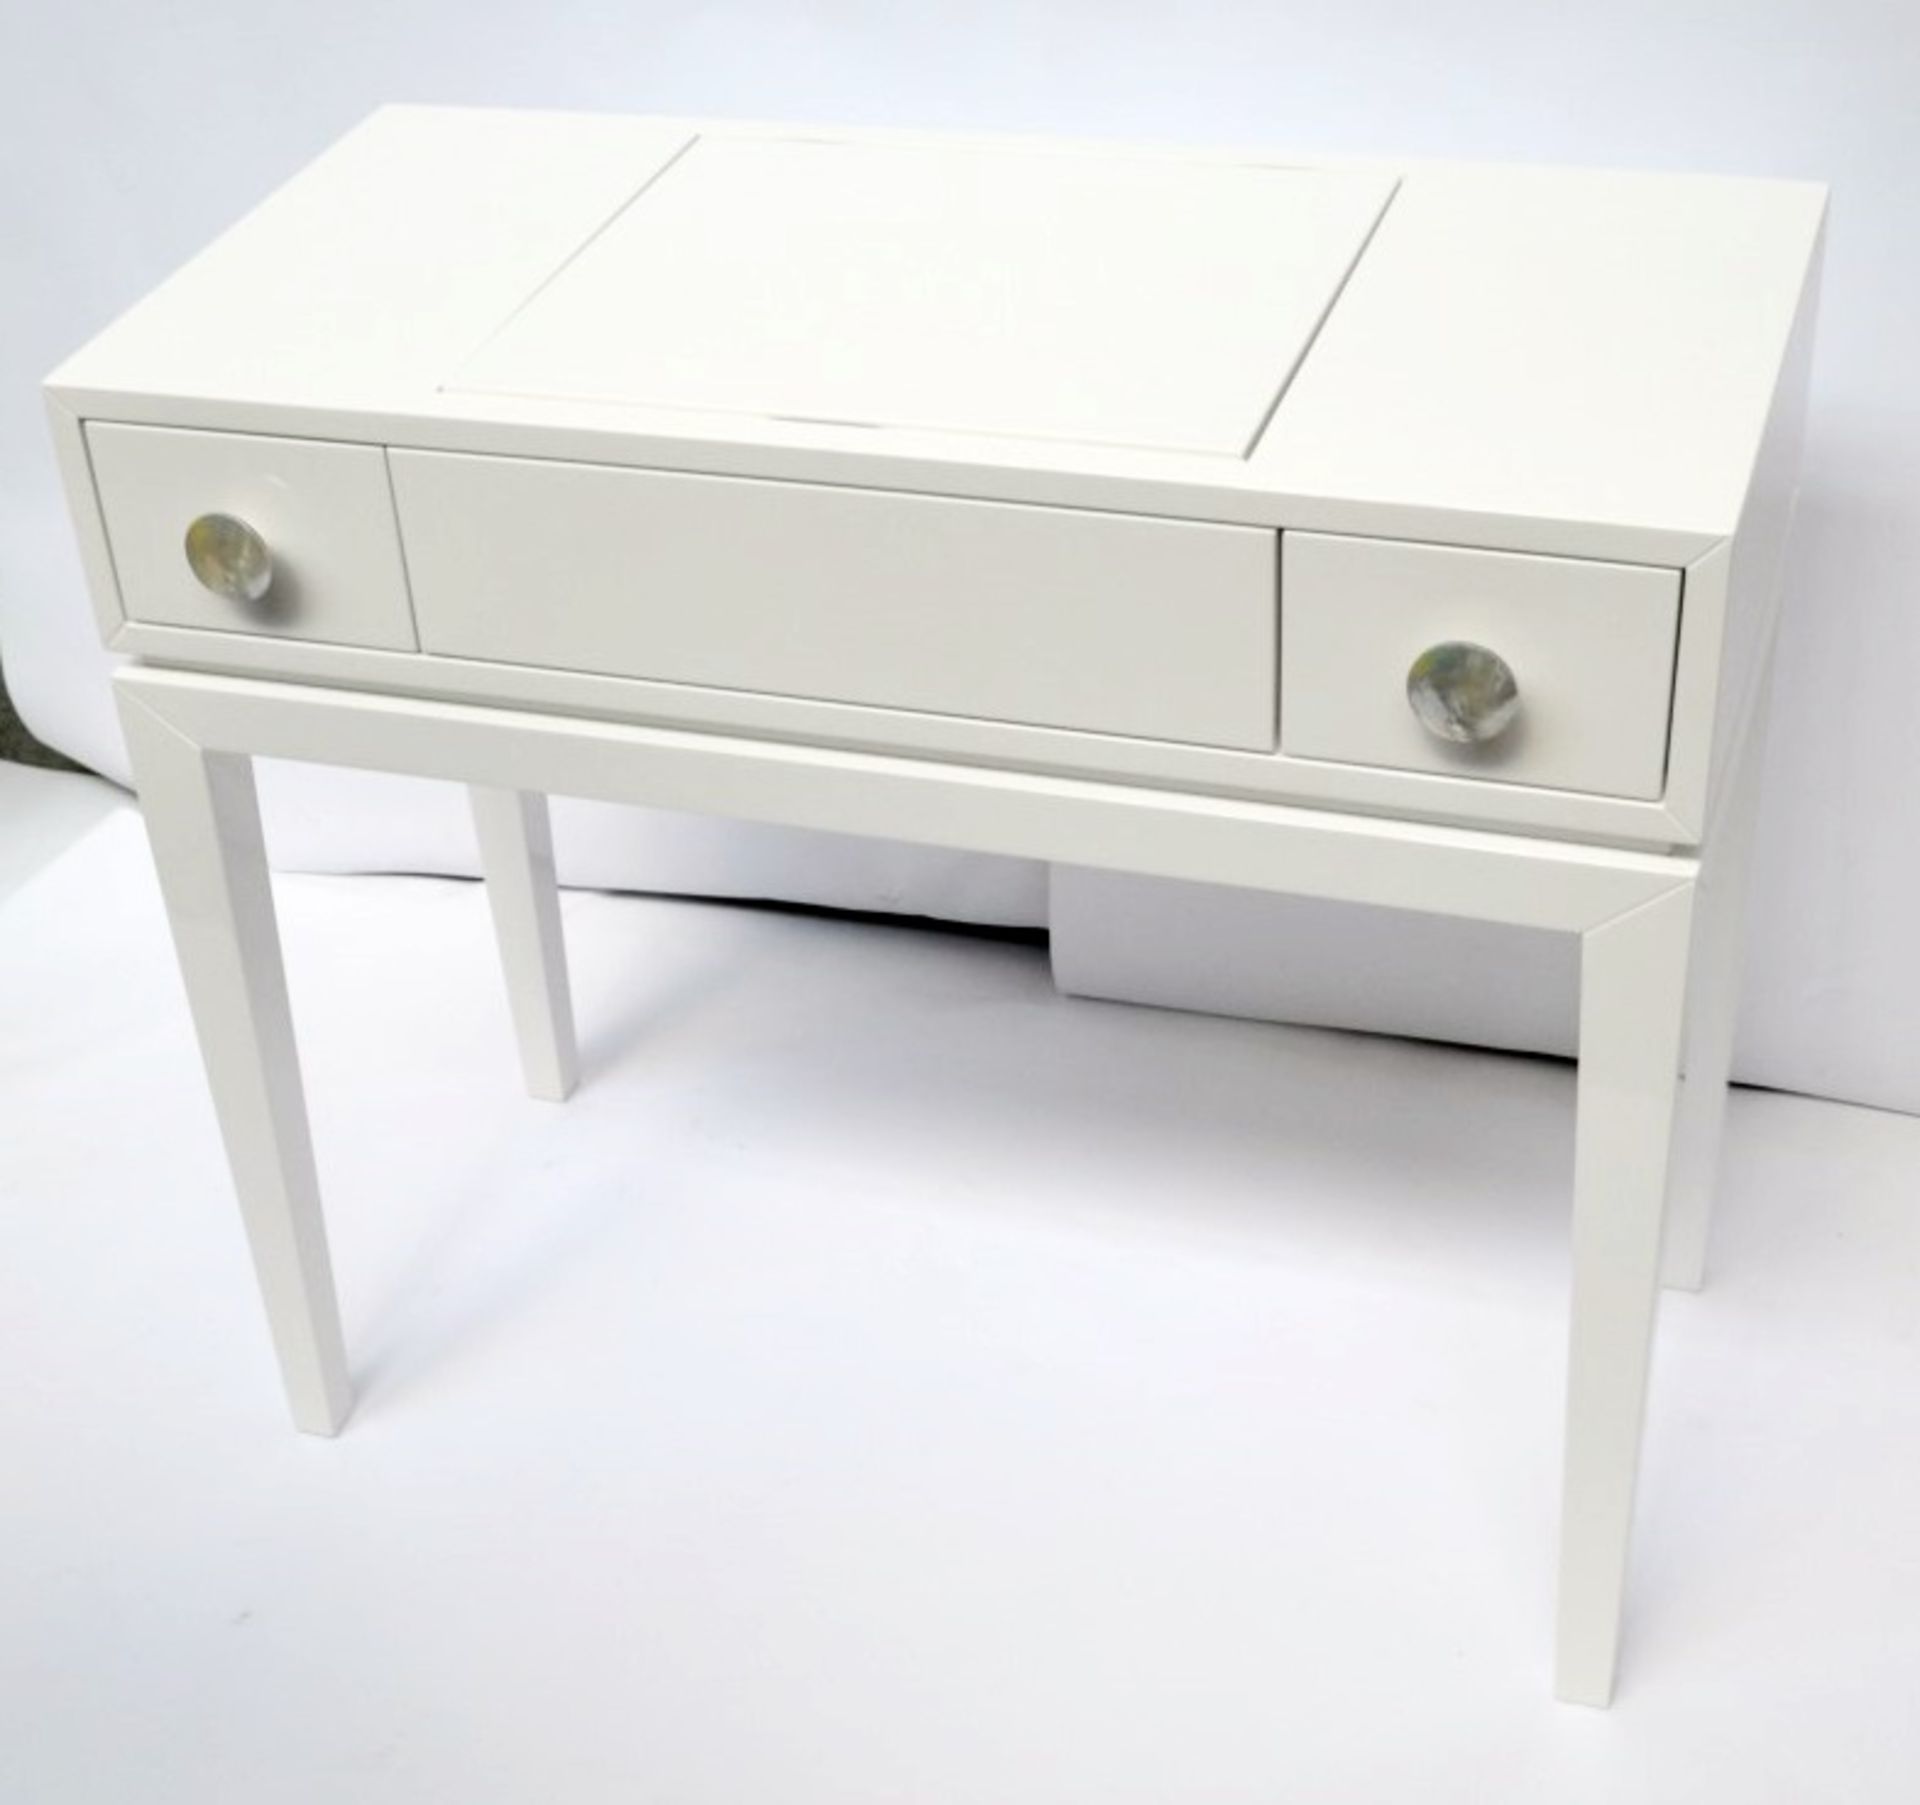 1 x FRATO Chicago Dressing Console - White Lacquered - Dimensions: H75 x W85 x D40cm - Ref: